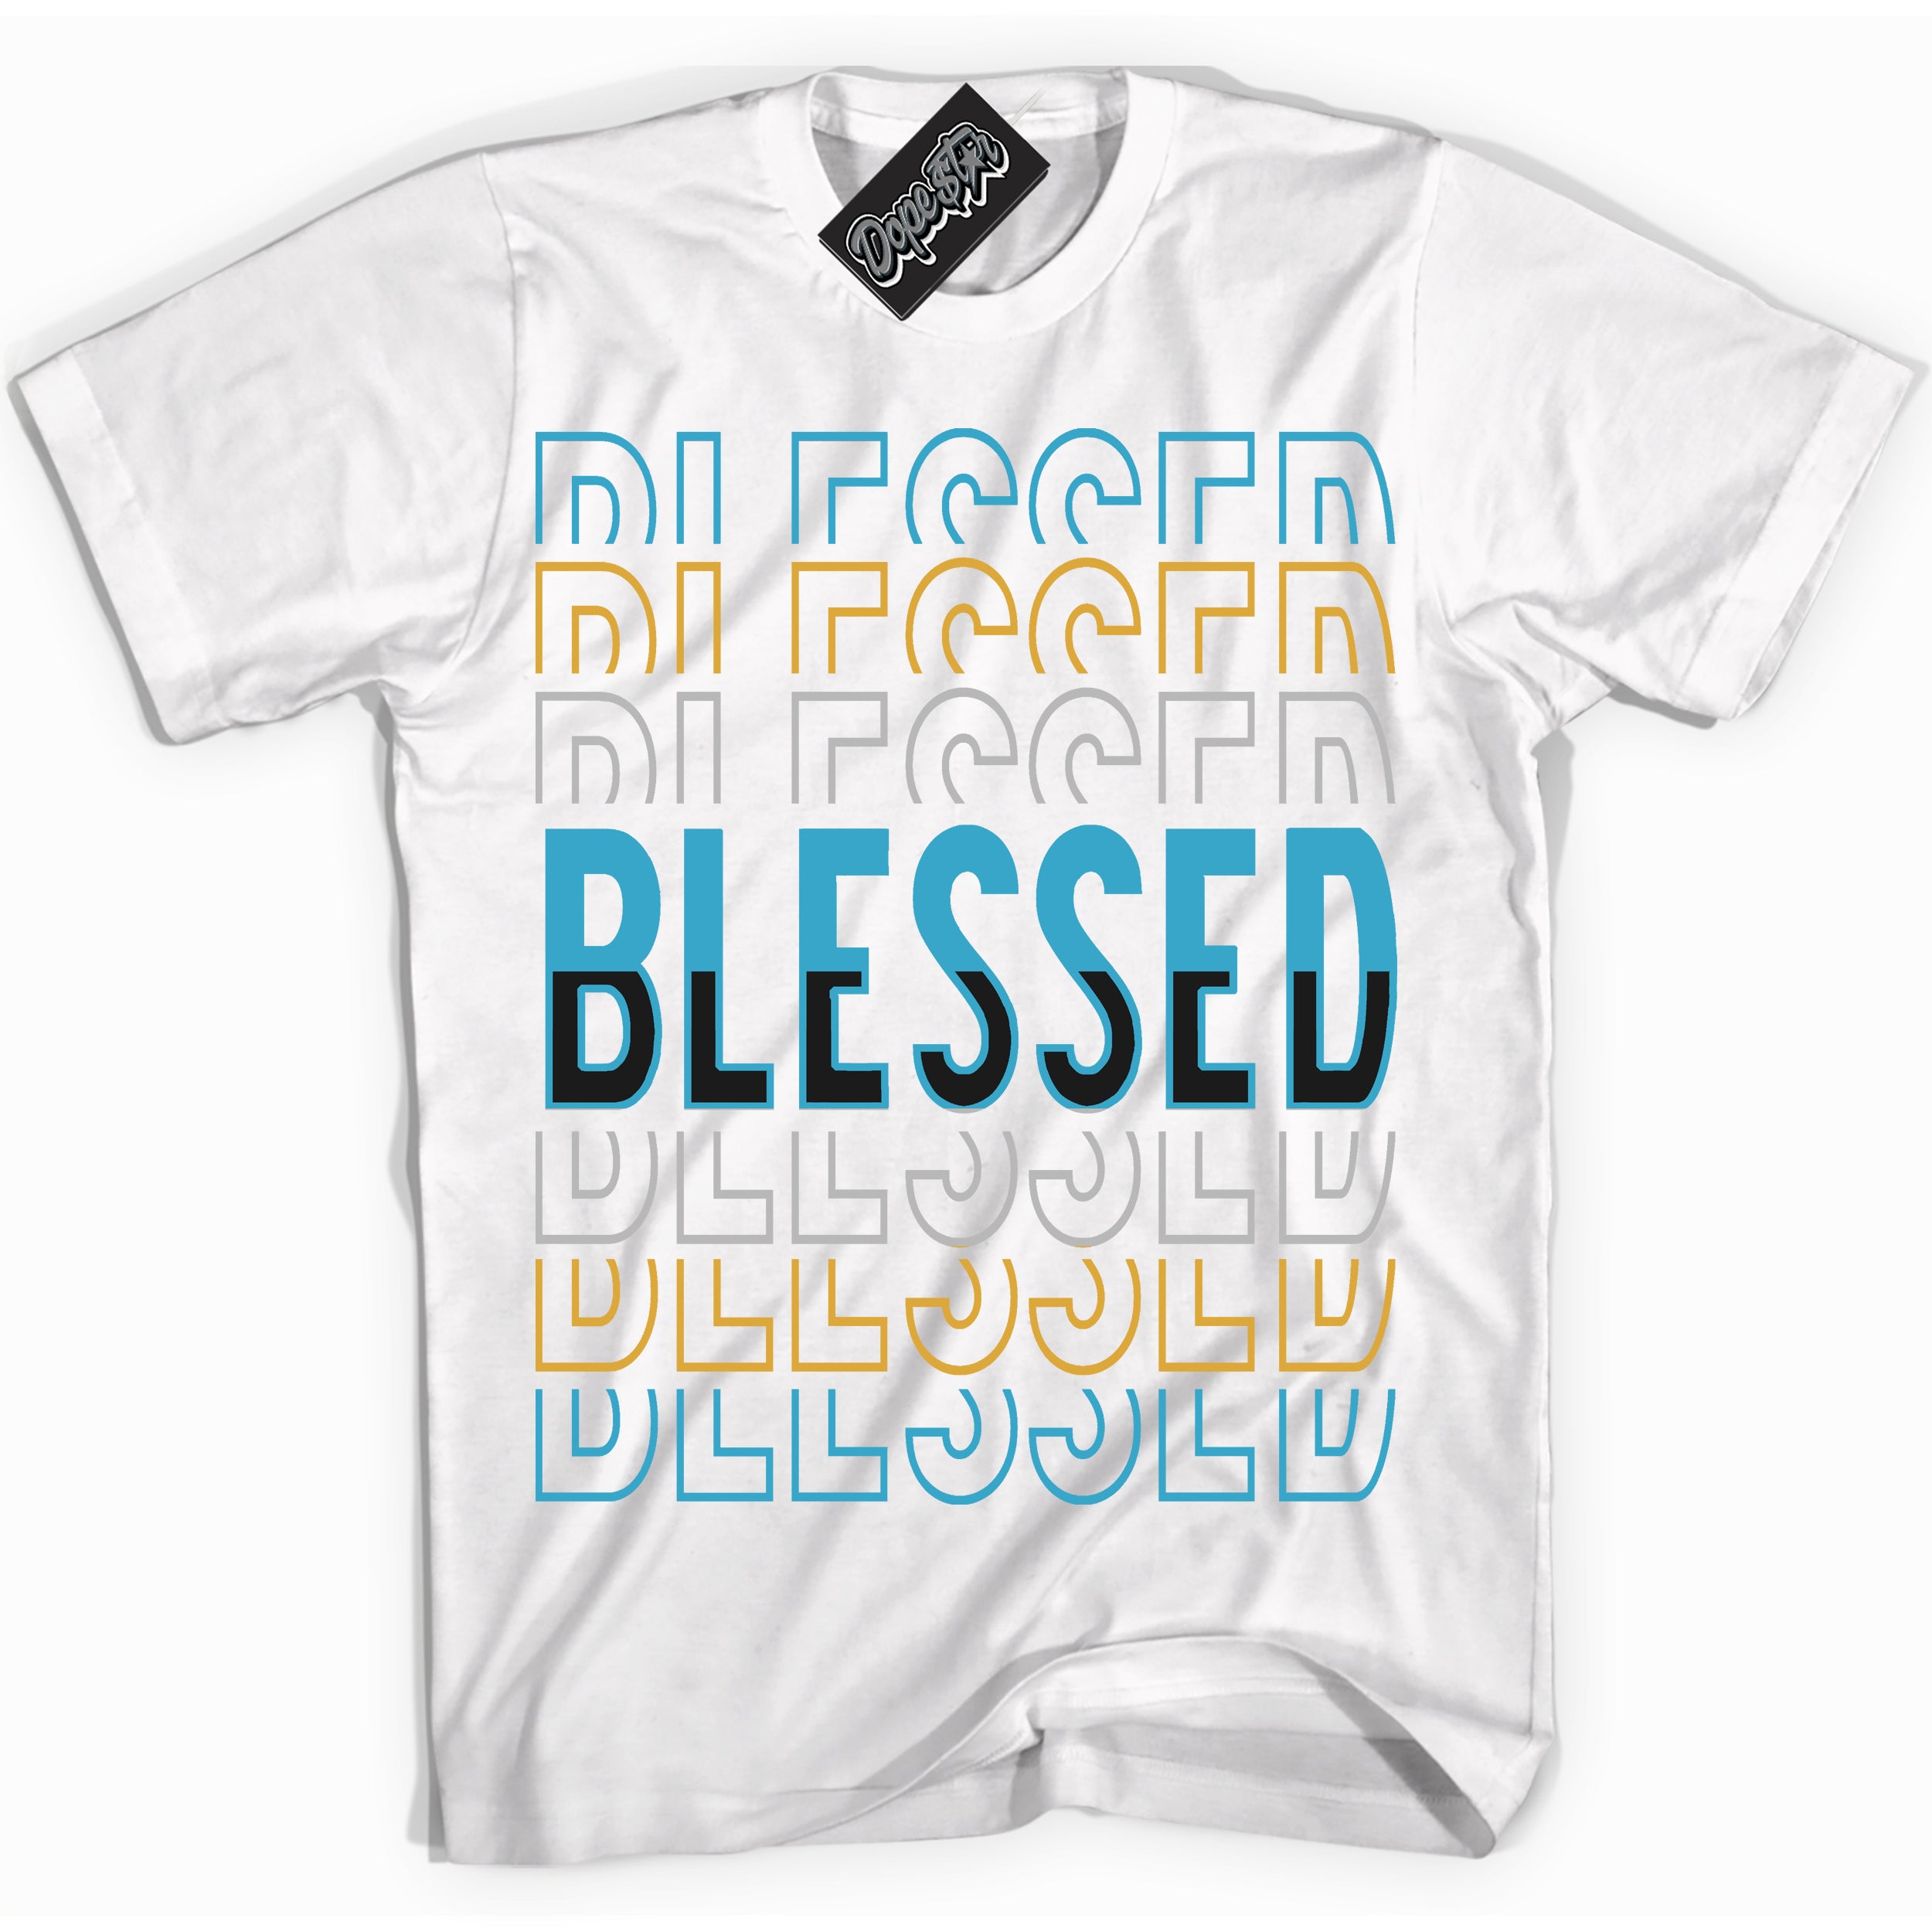 Cool White Shirt with “ Blessed Stacked” design that perfectly matches Aqua 5s Sneakers.